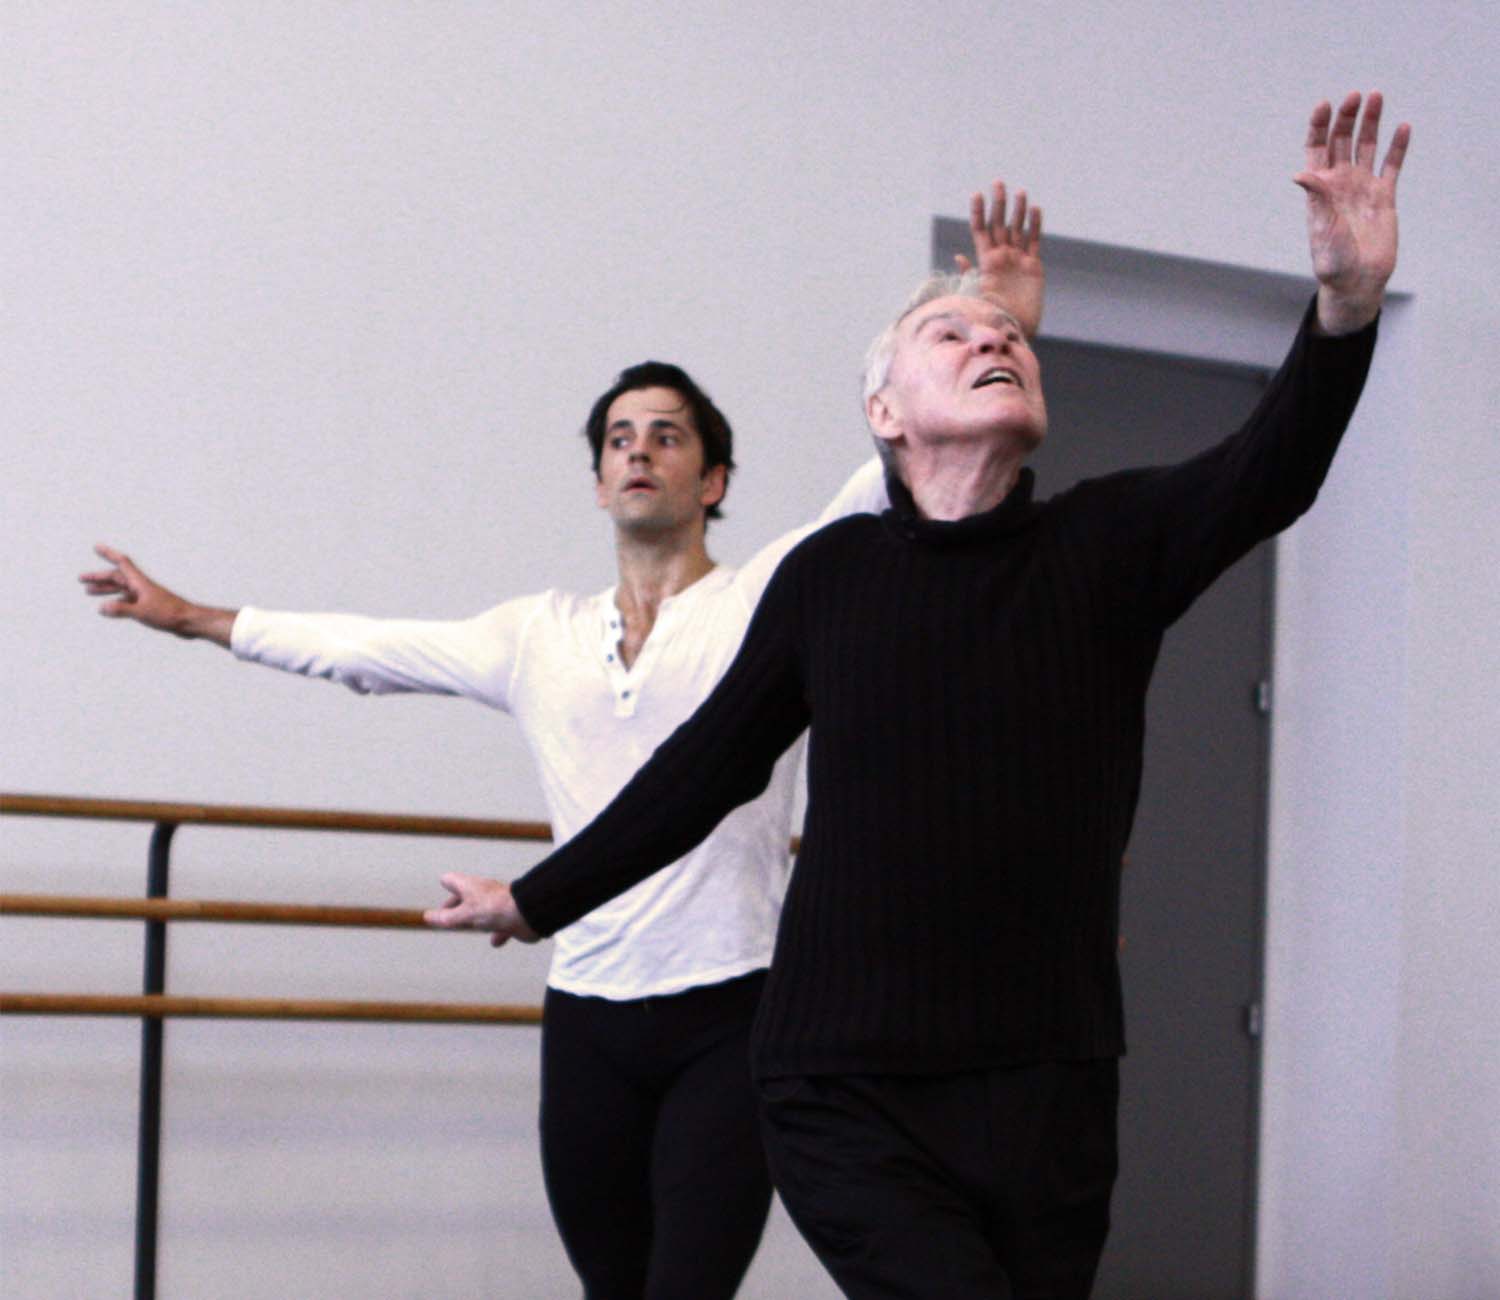 Robert Fairchild coached by Jacques d'Amboise, both looking up to one arm in a pose from Apollo